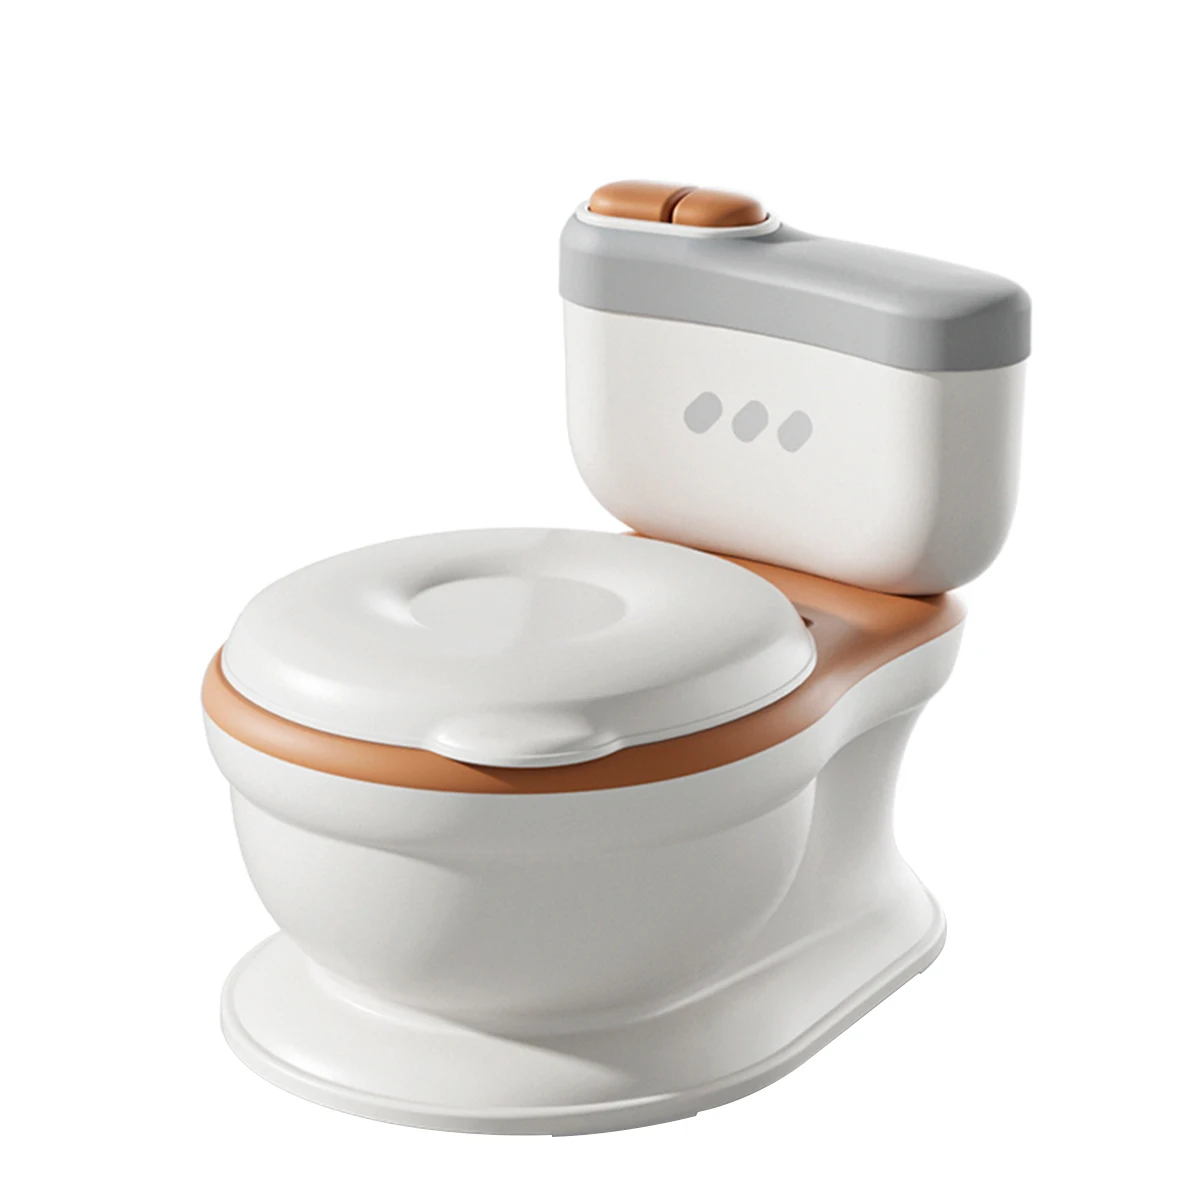 Realistic Potty Training Toilet With Life Like Flush Button And Sound